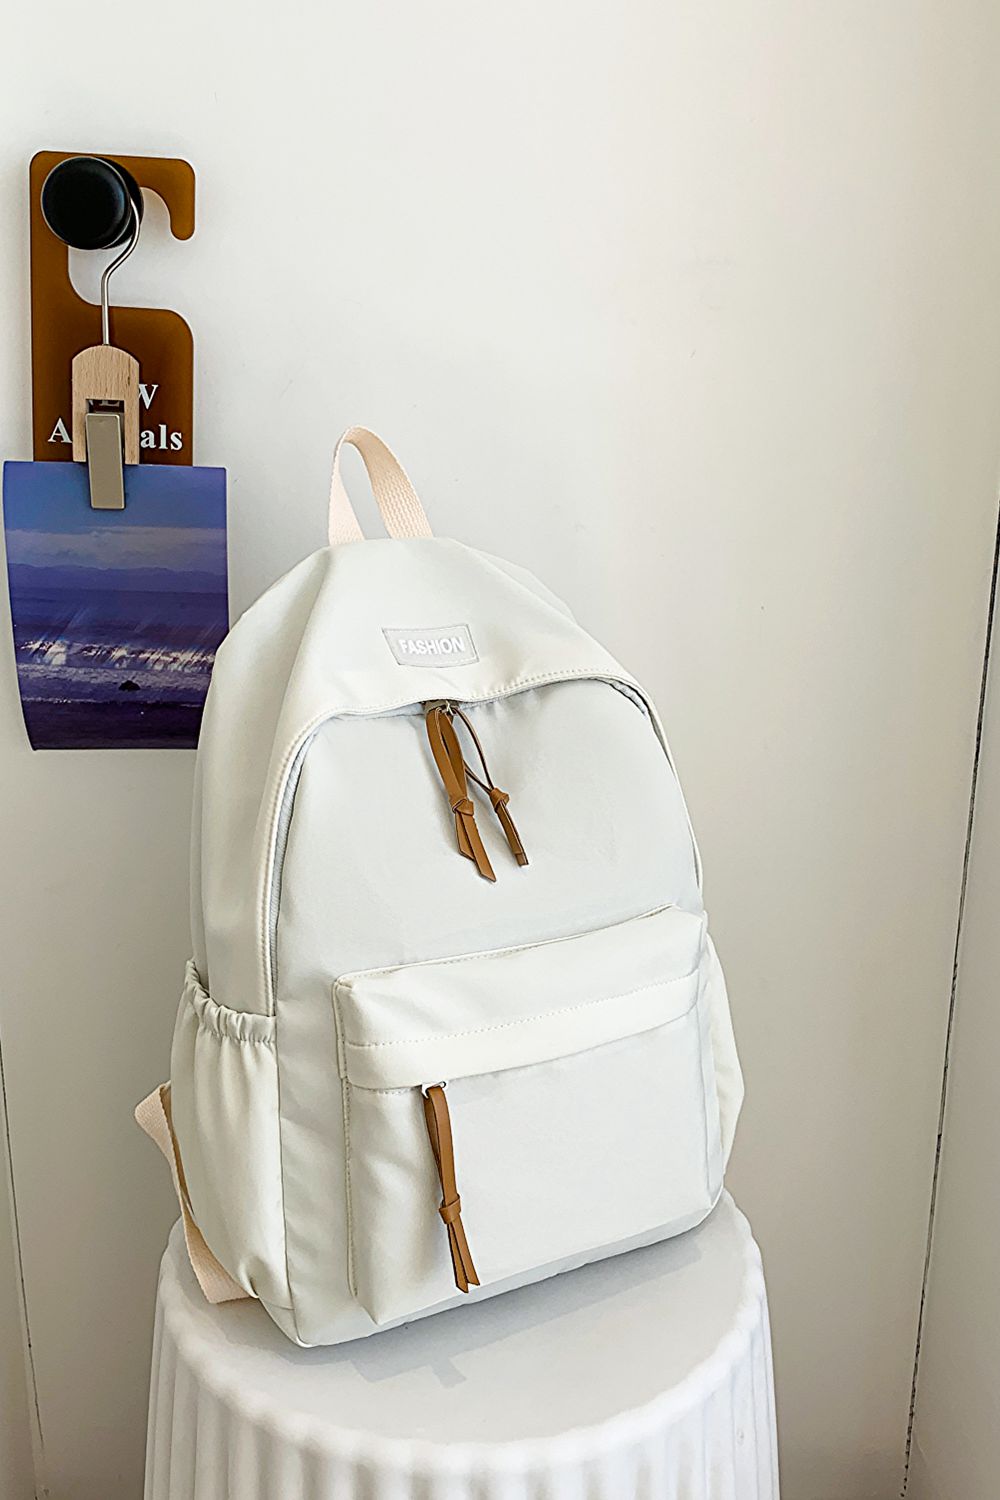 TranquilNights FASHION Polyester Backpack